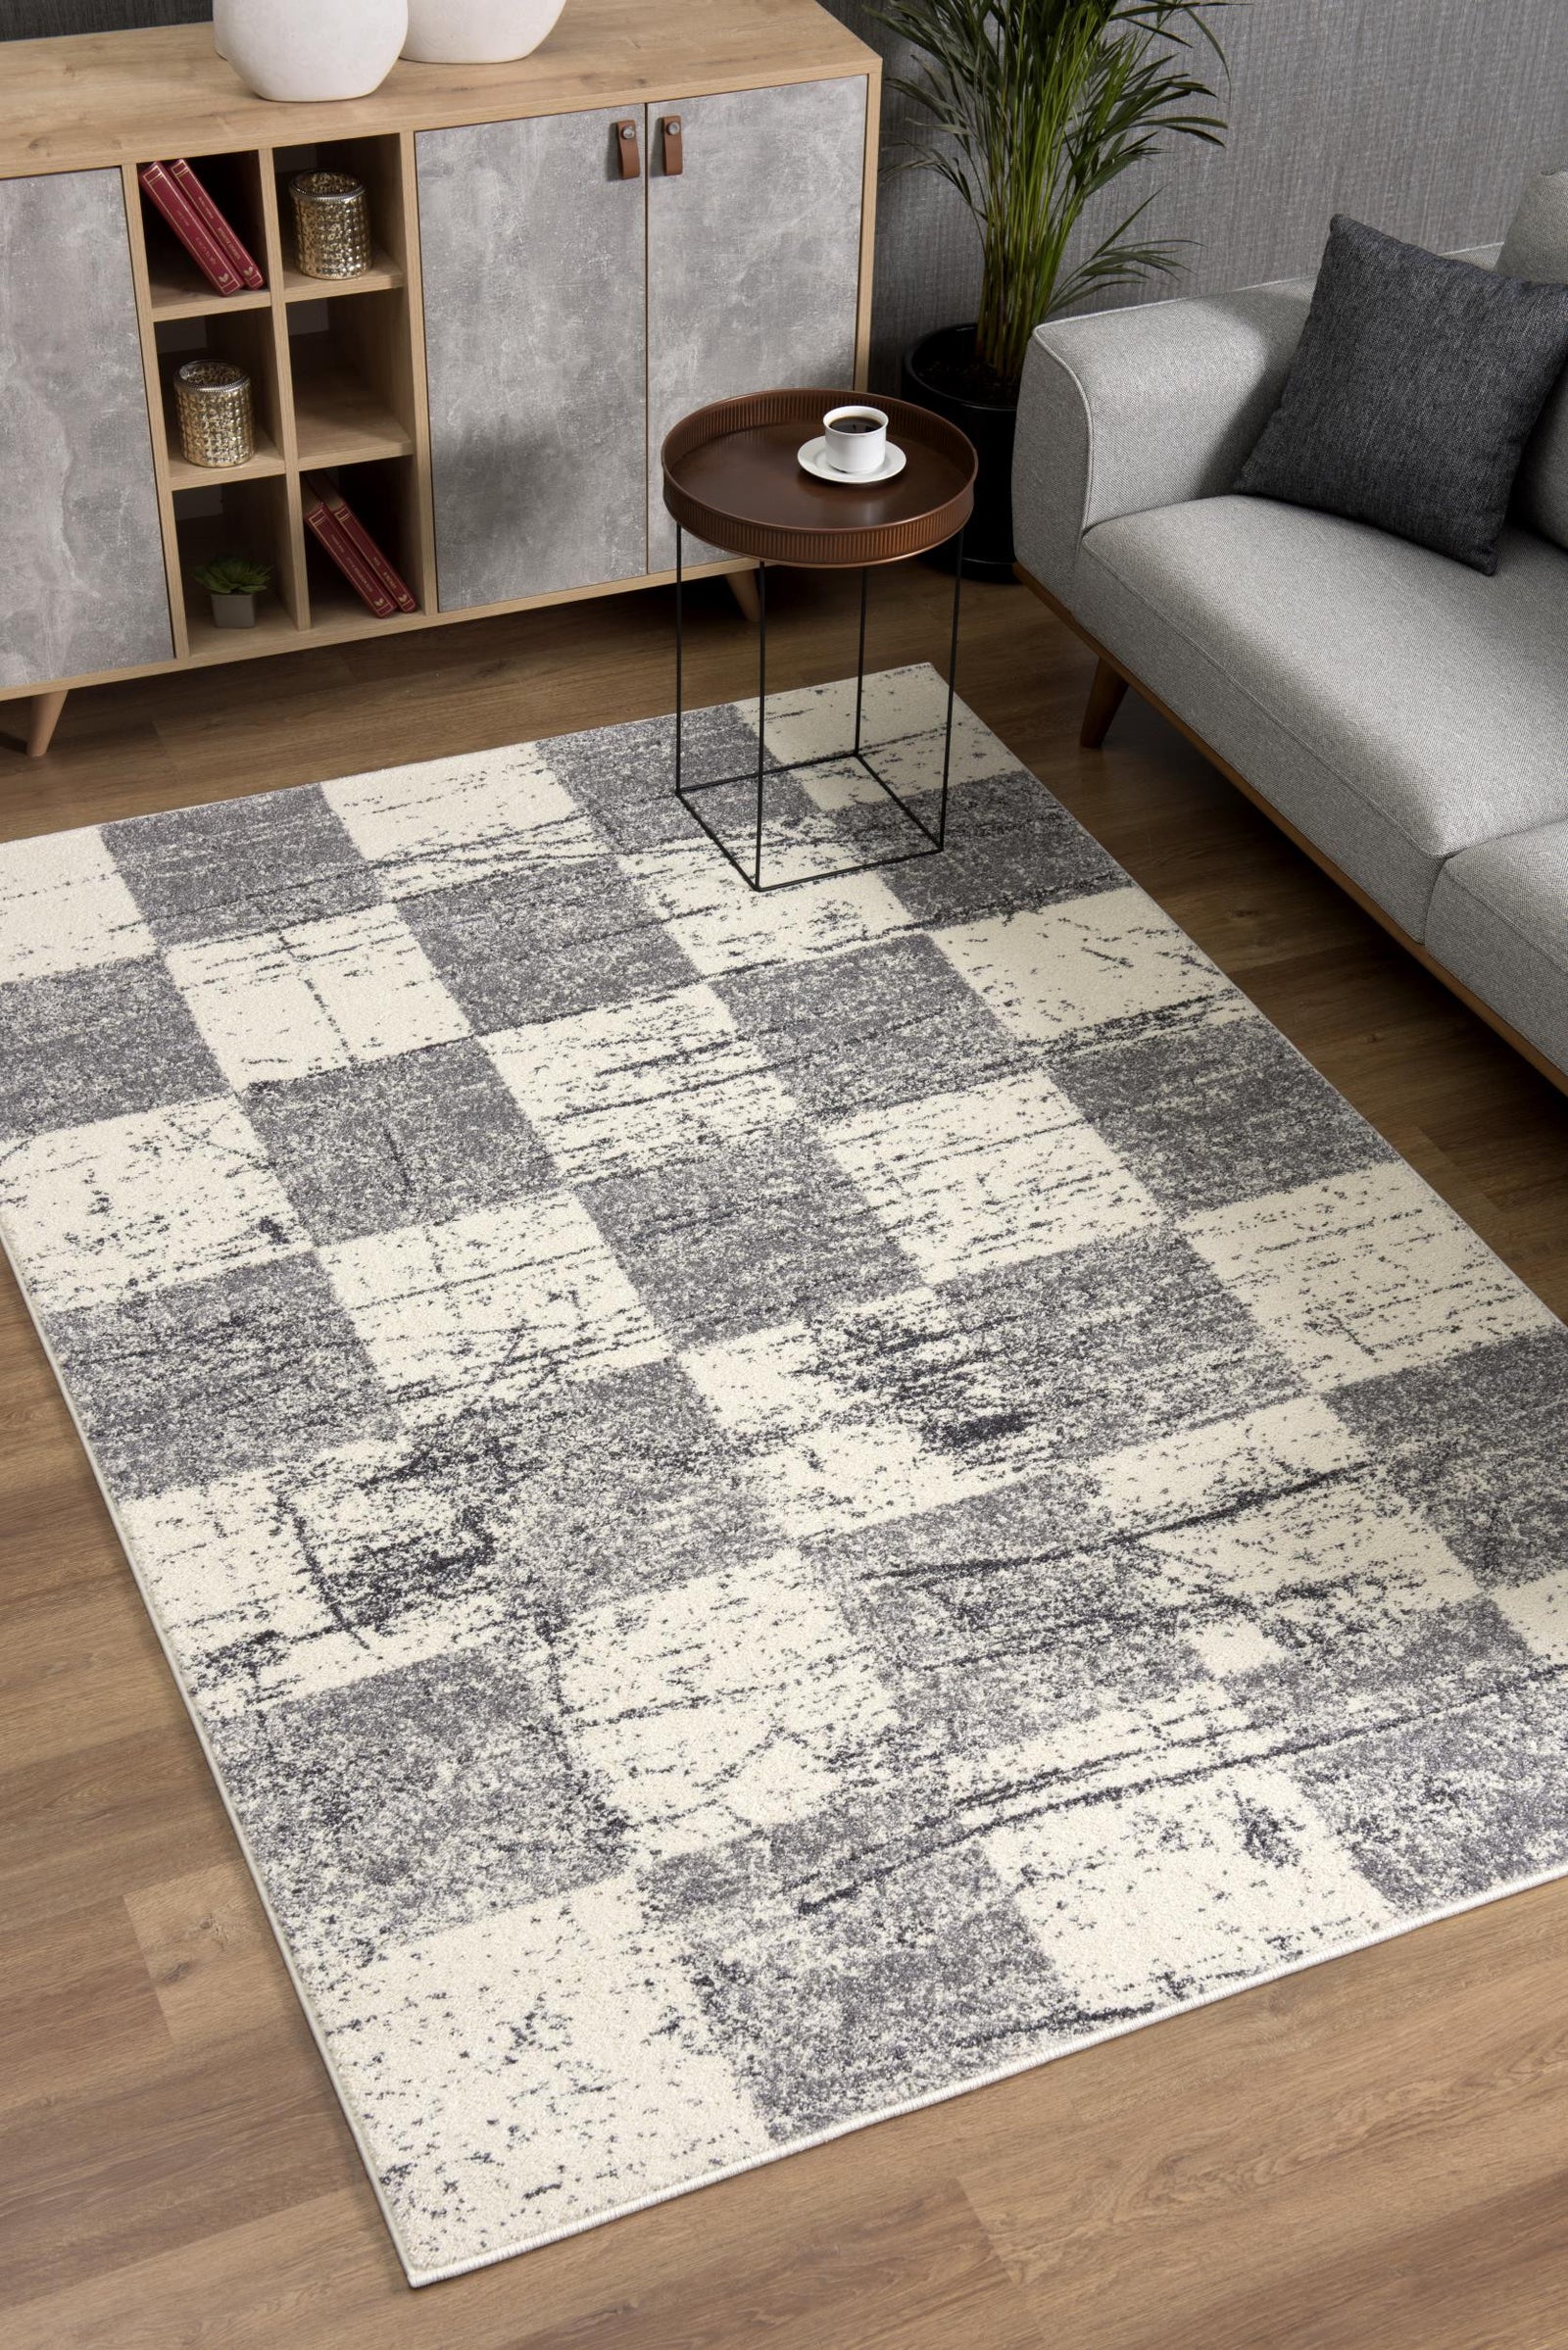 4’ X 6’ White And Gray Checkered Area Rug